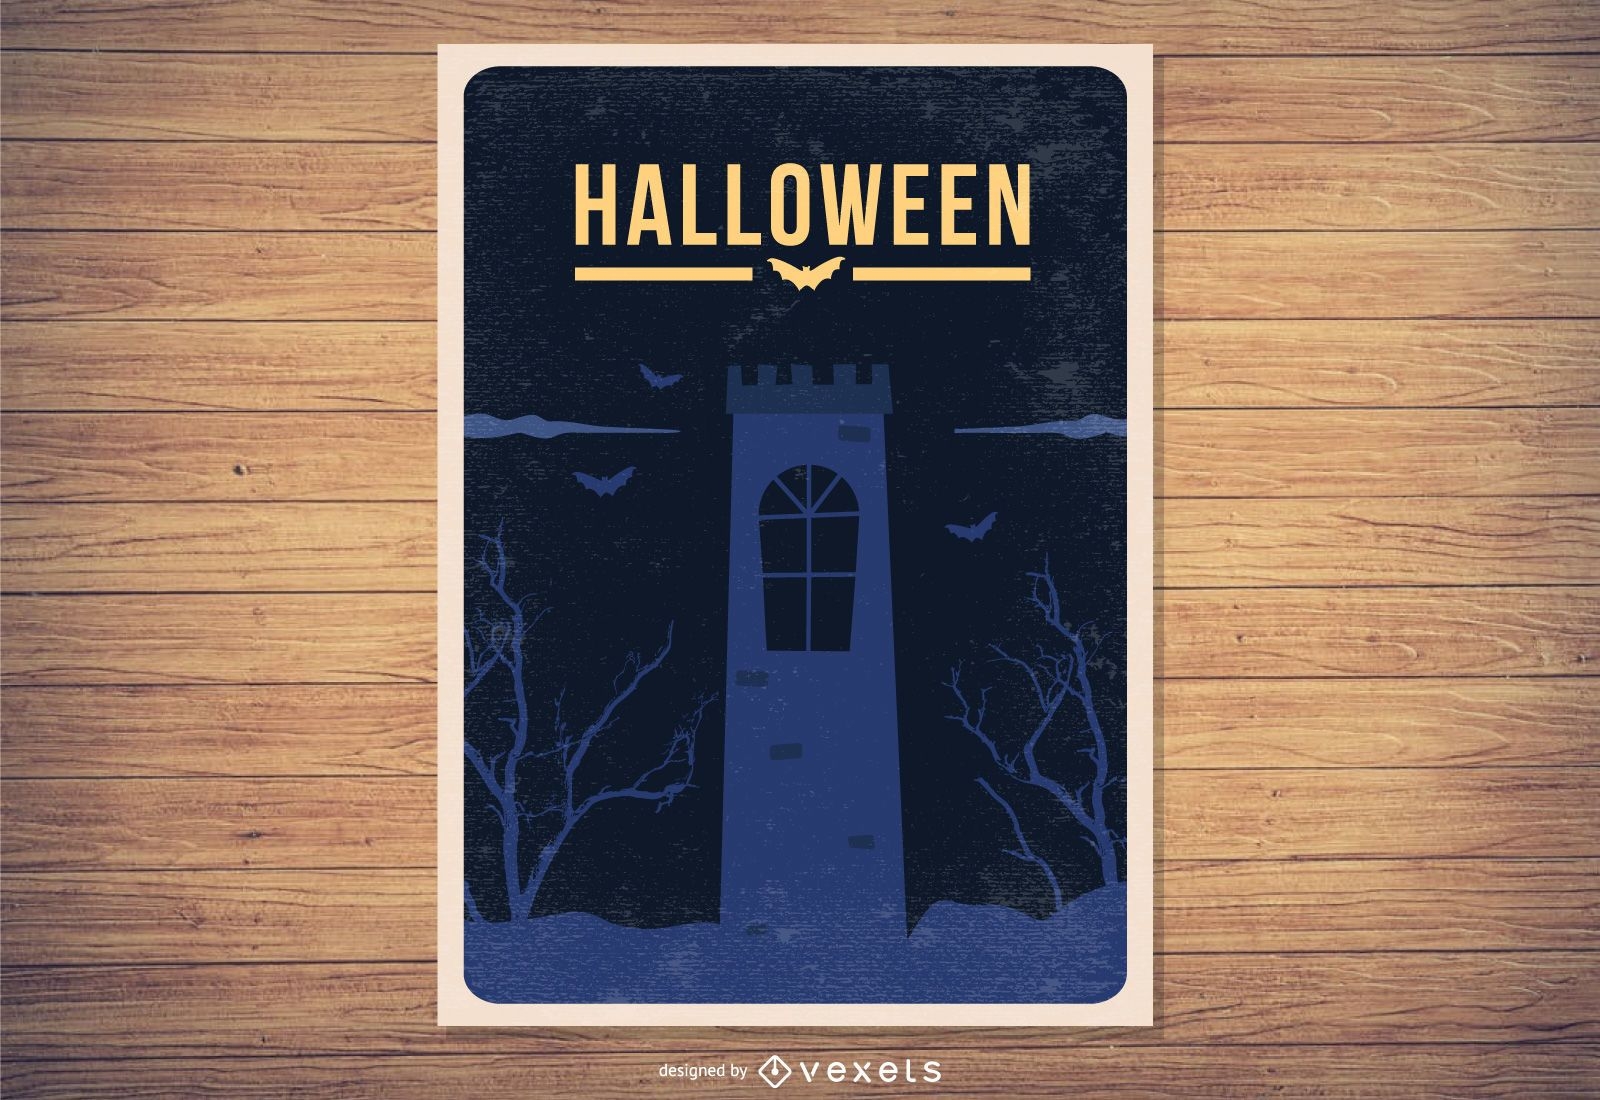 Grungy Vintage Halloween Poster